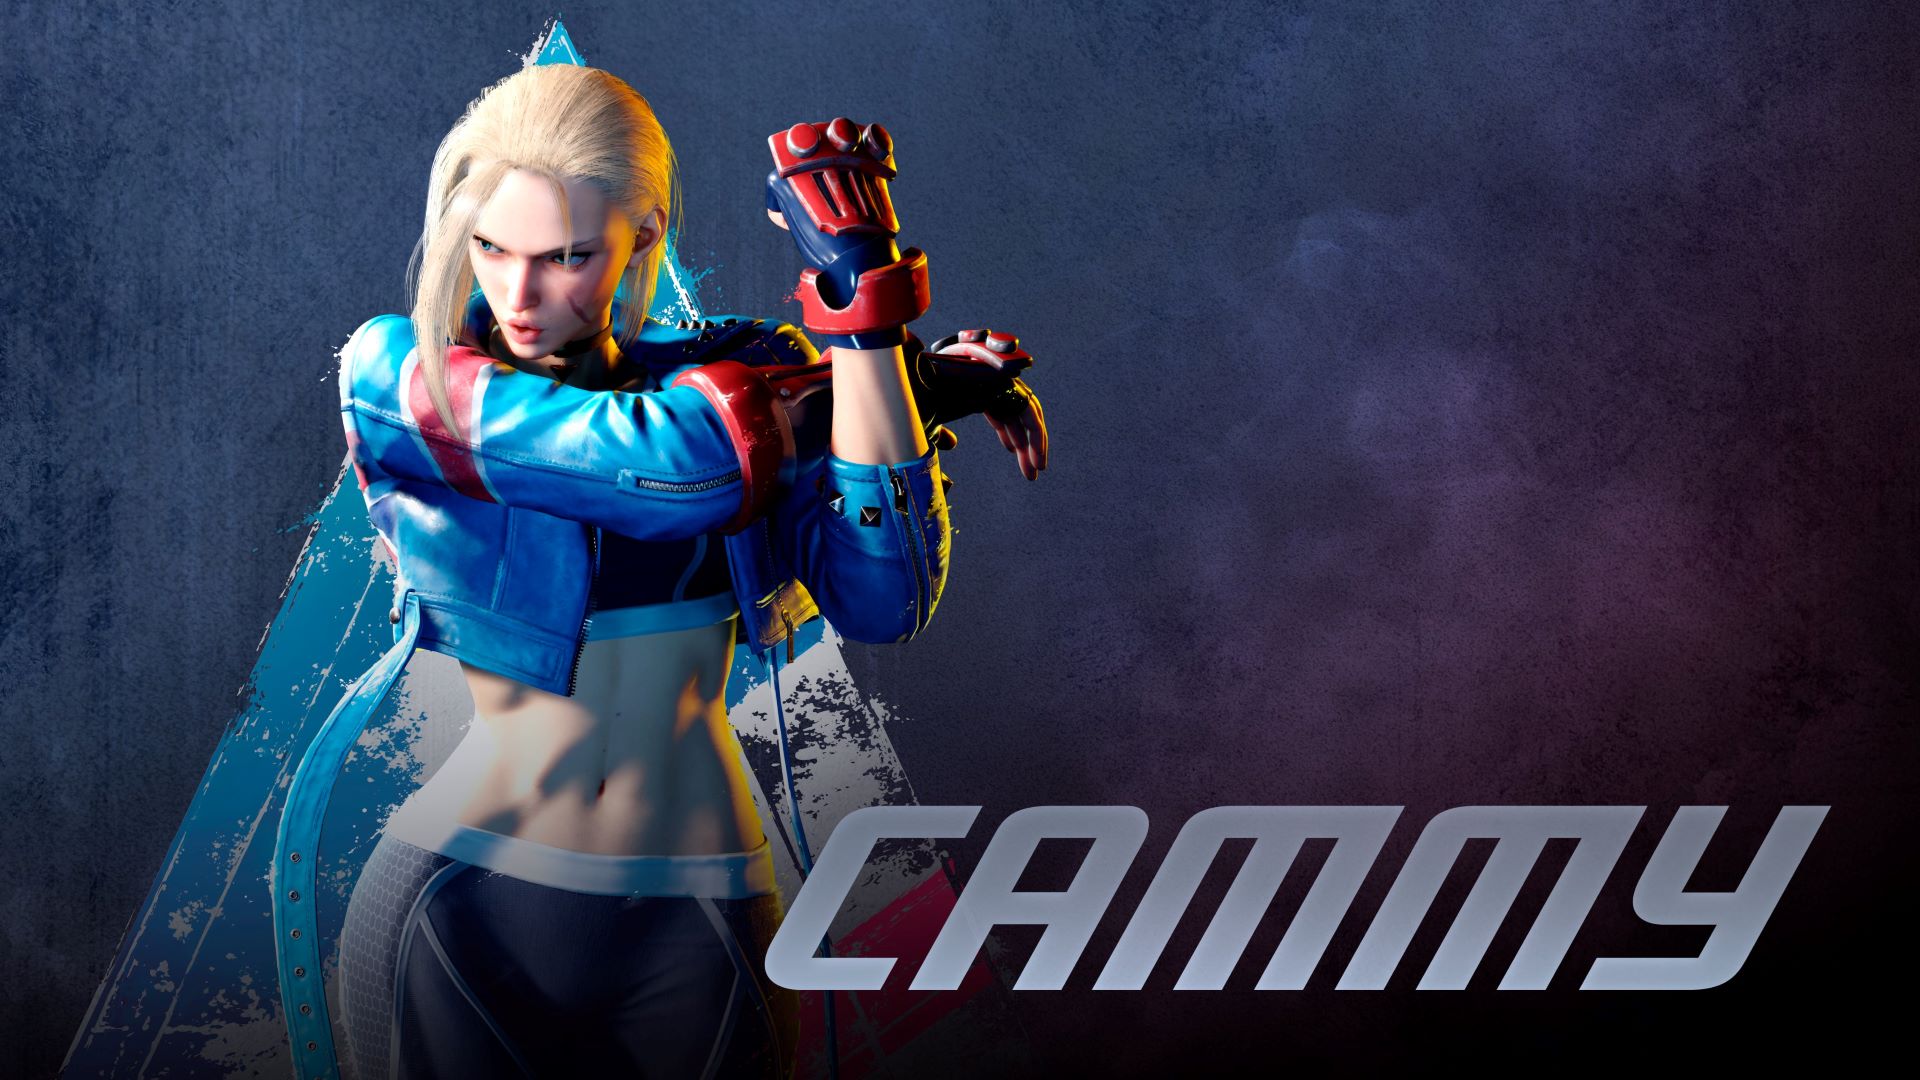 Street Fighter 6 – Zangief, Lily, and Cammy Receive New Gameplay Details  and Screenshots